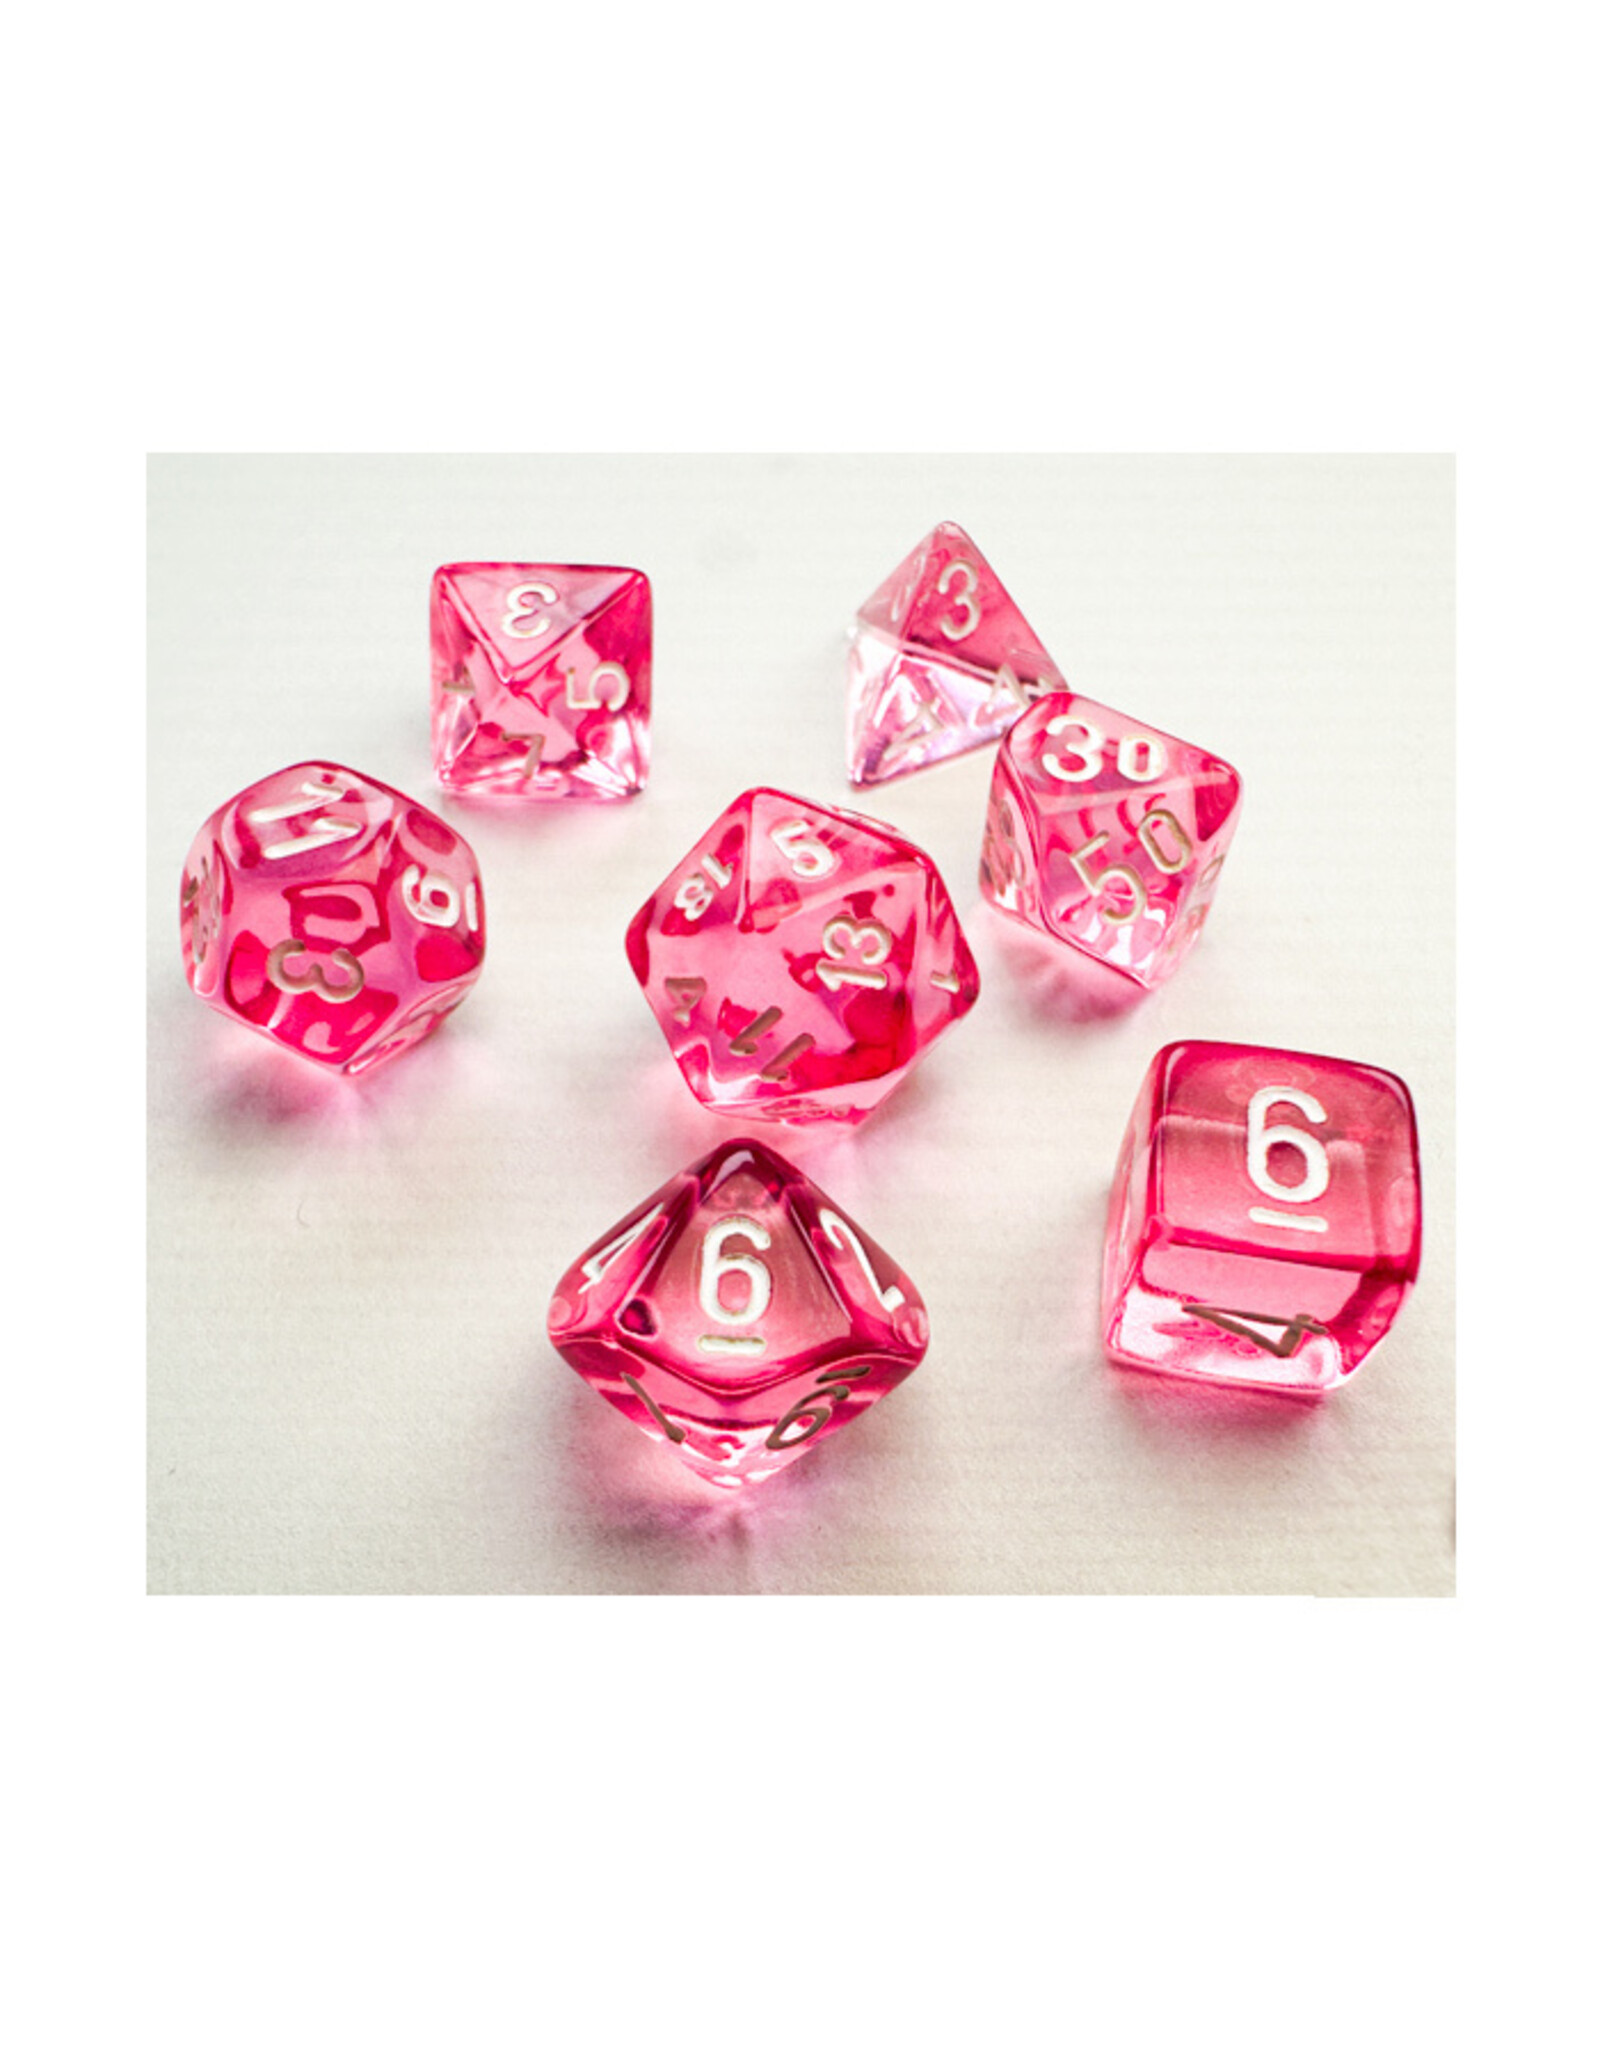 Chessex 7-Set Mini Translucent Pink with White